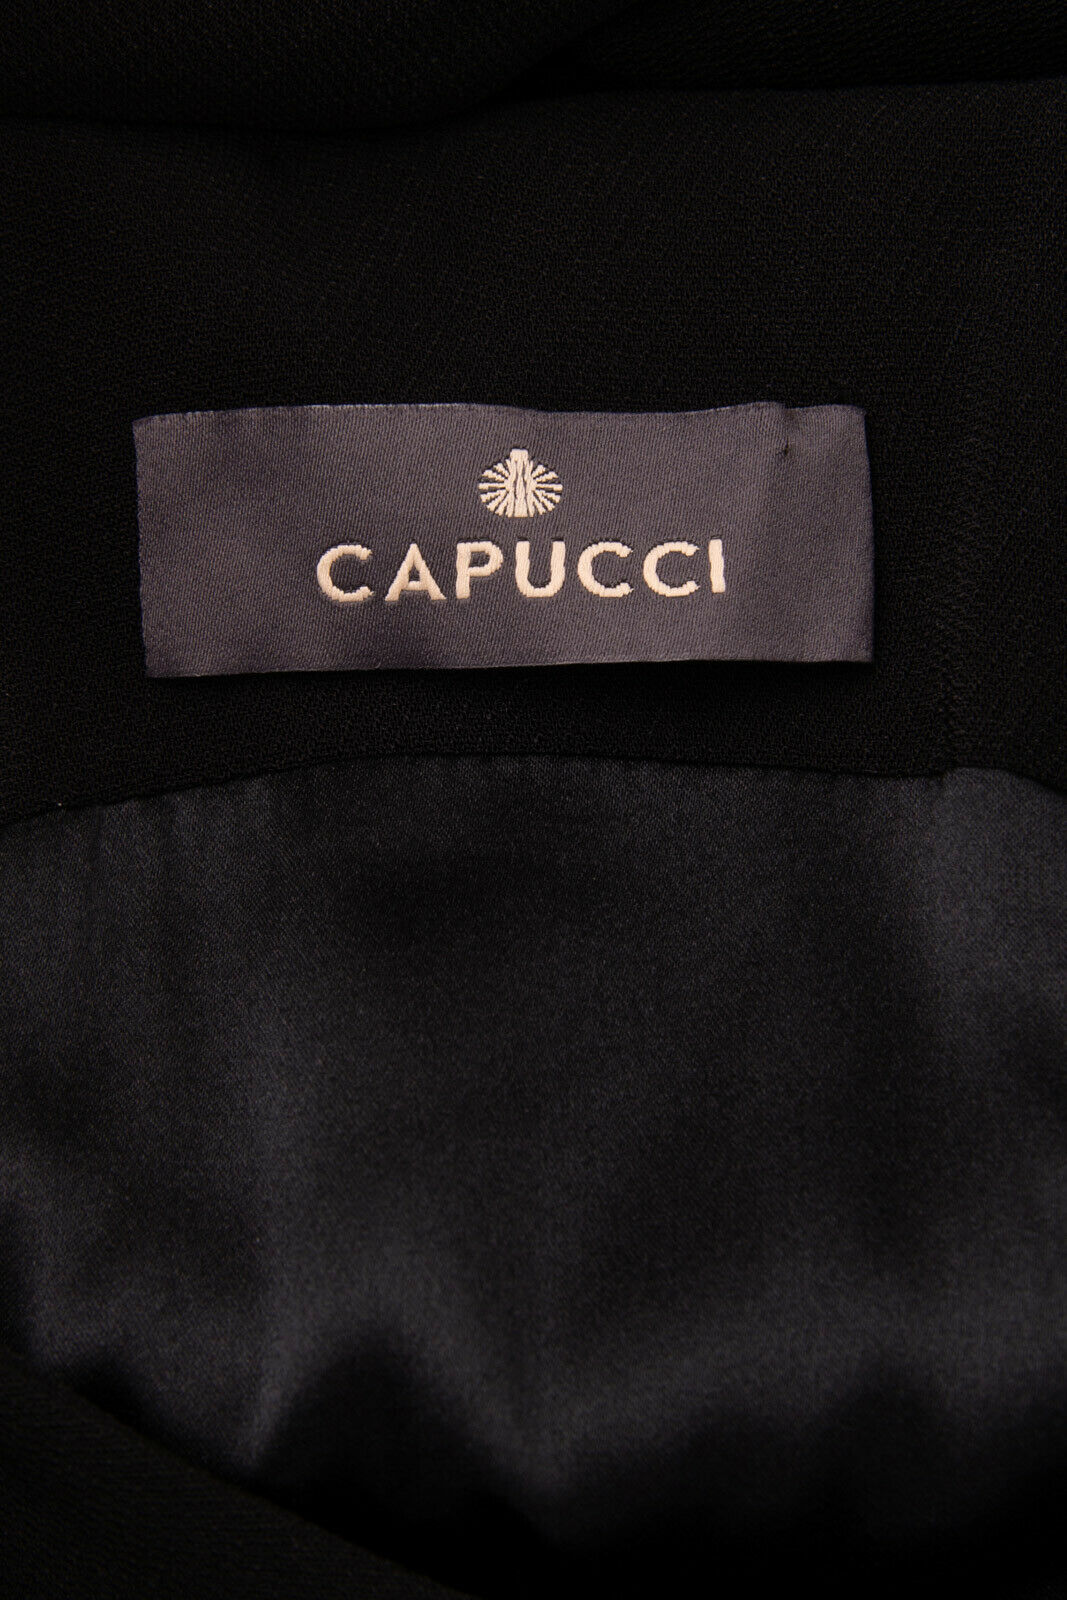 CAPUCCI Pencil Dress Size 40 Made in Italy